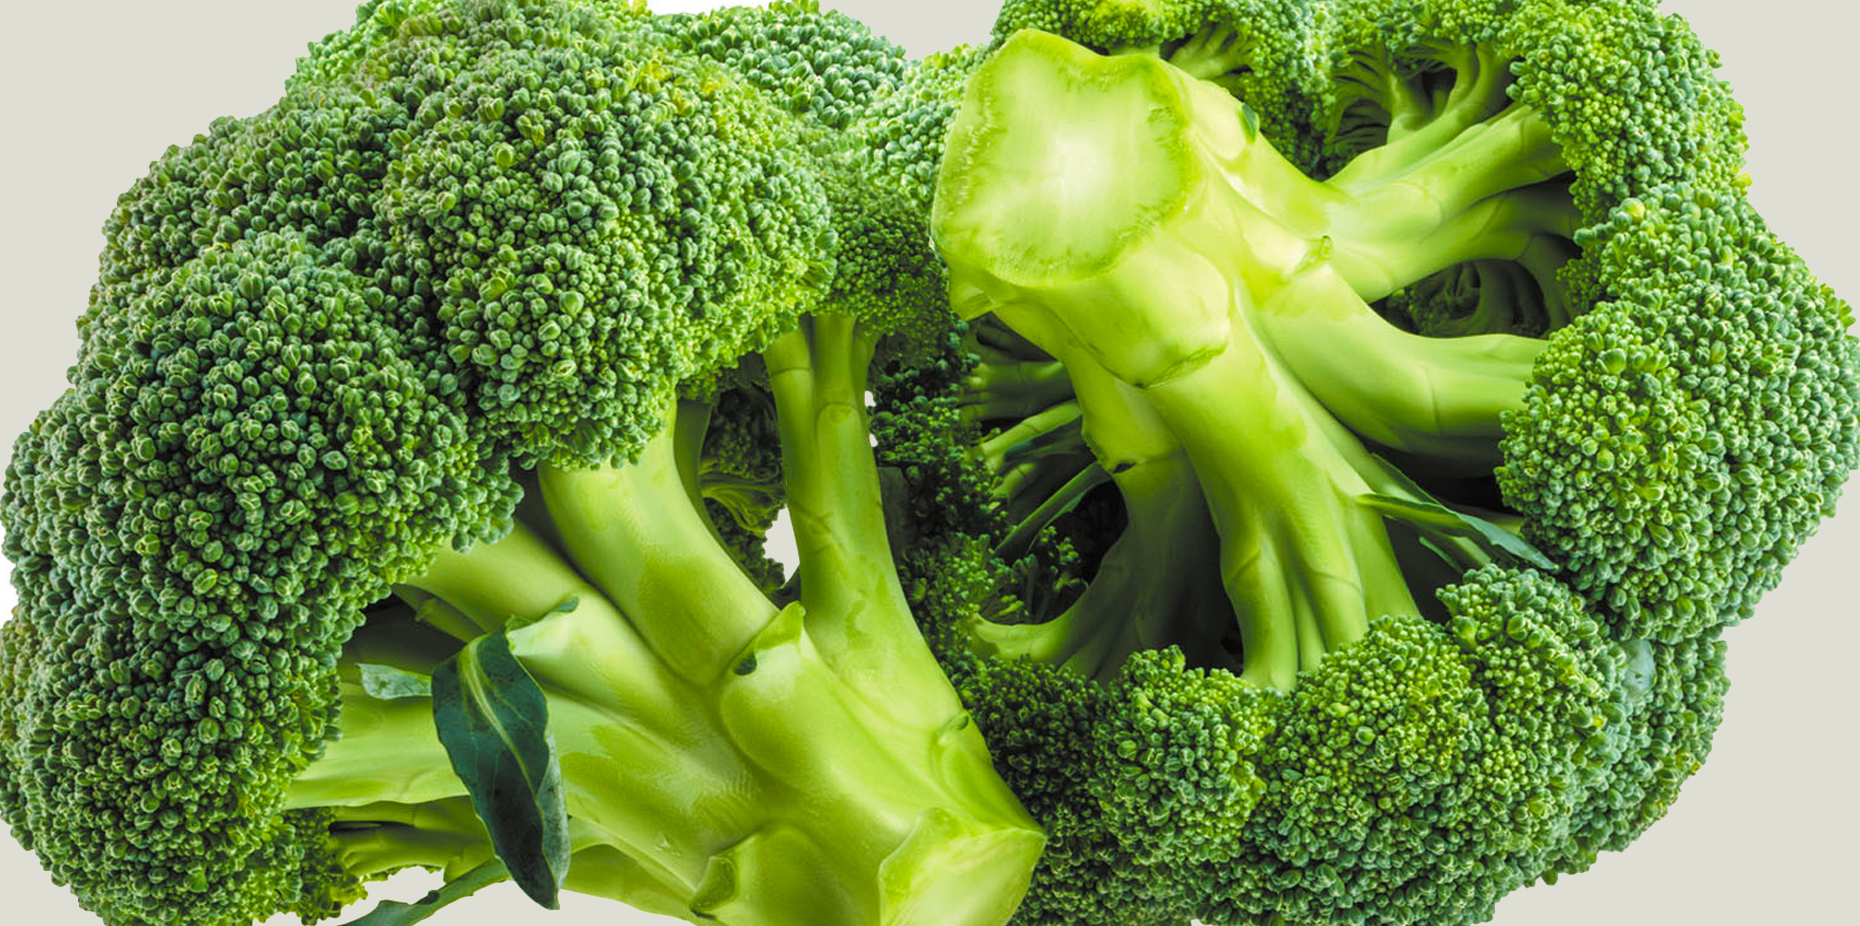 Broccoli: Nutrition, Health Benefits, Facts, and More